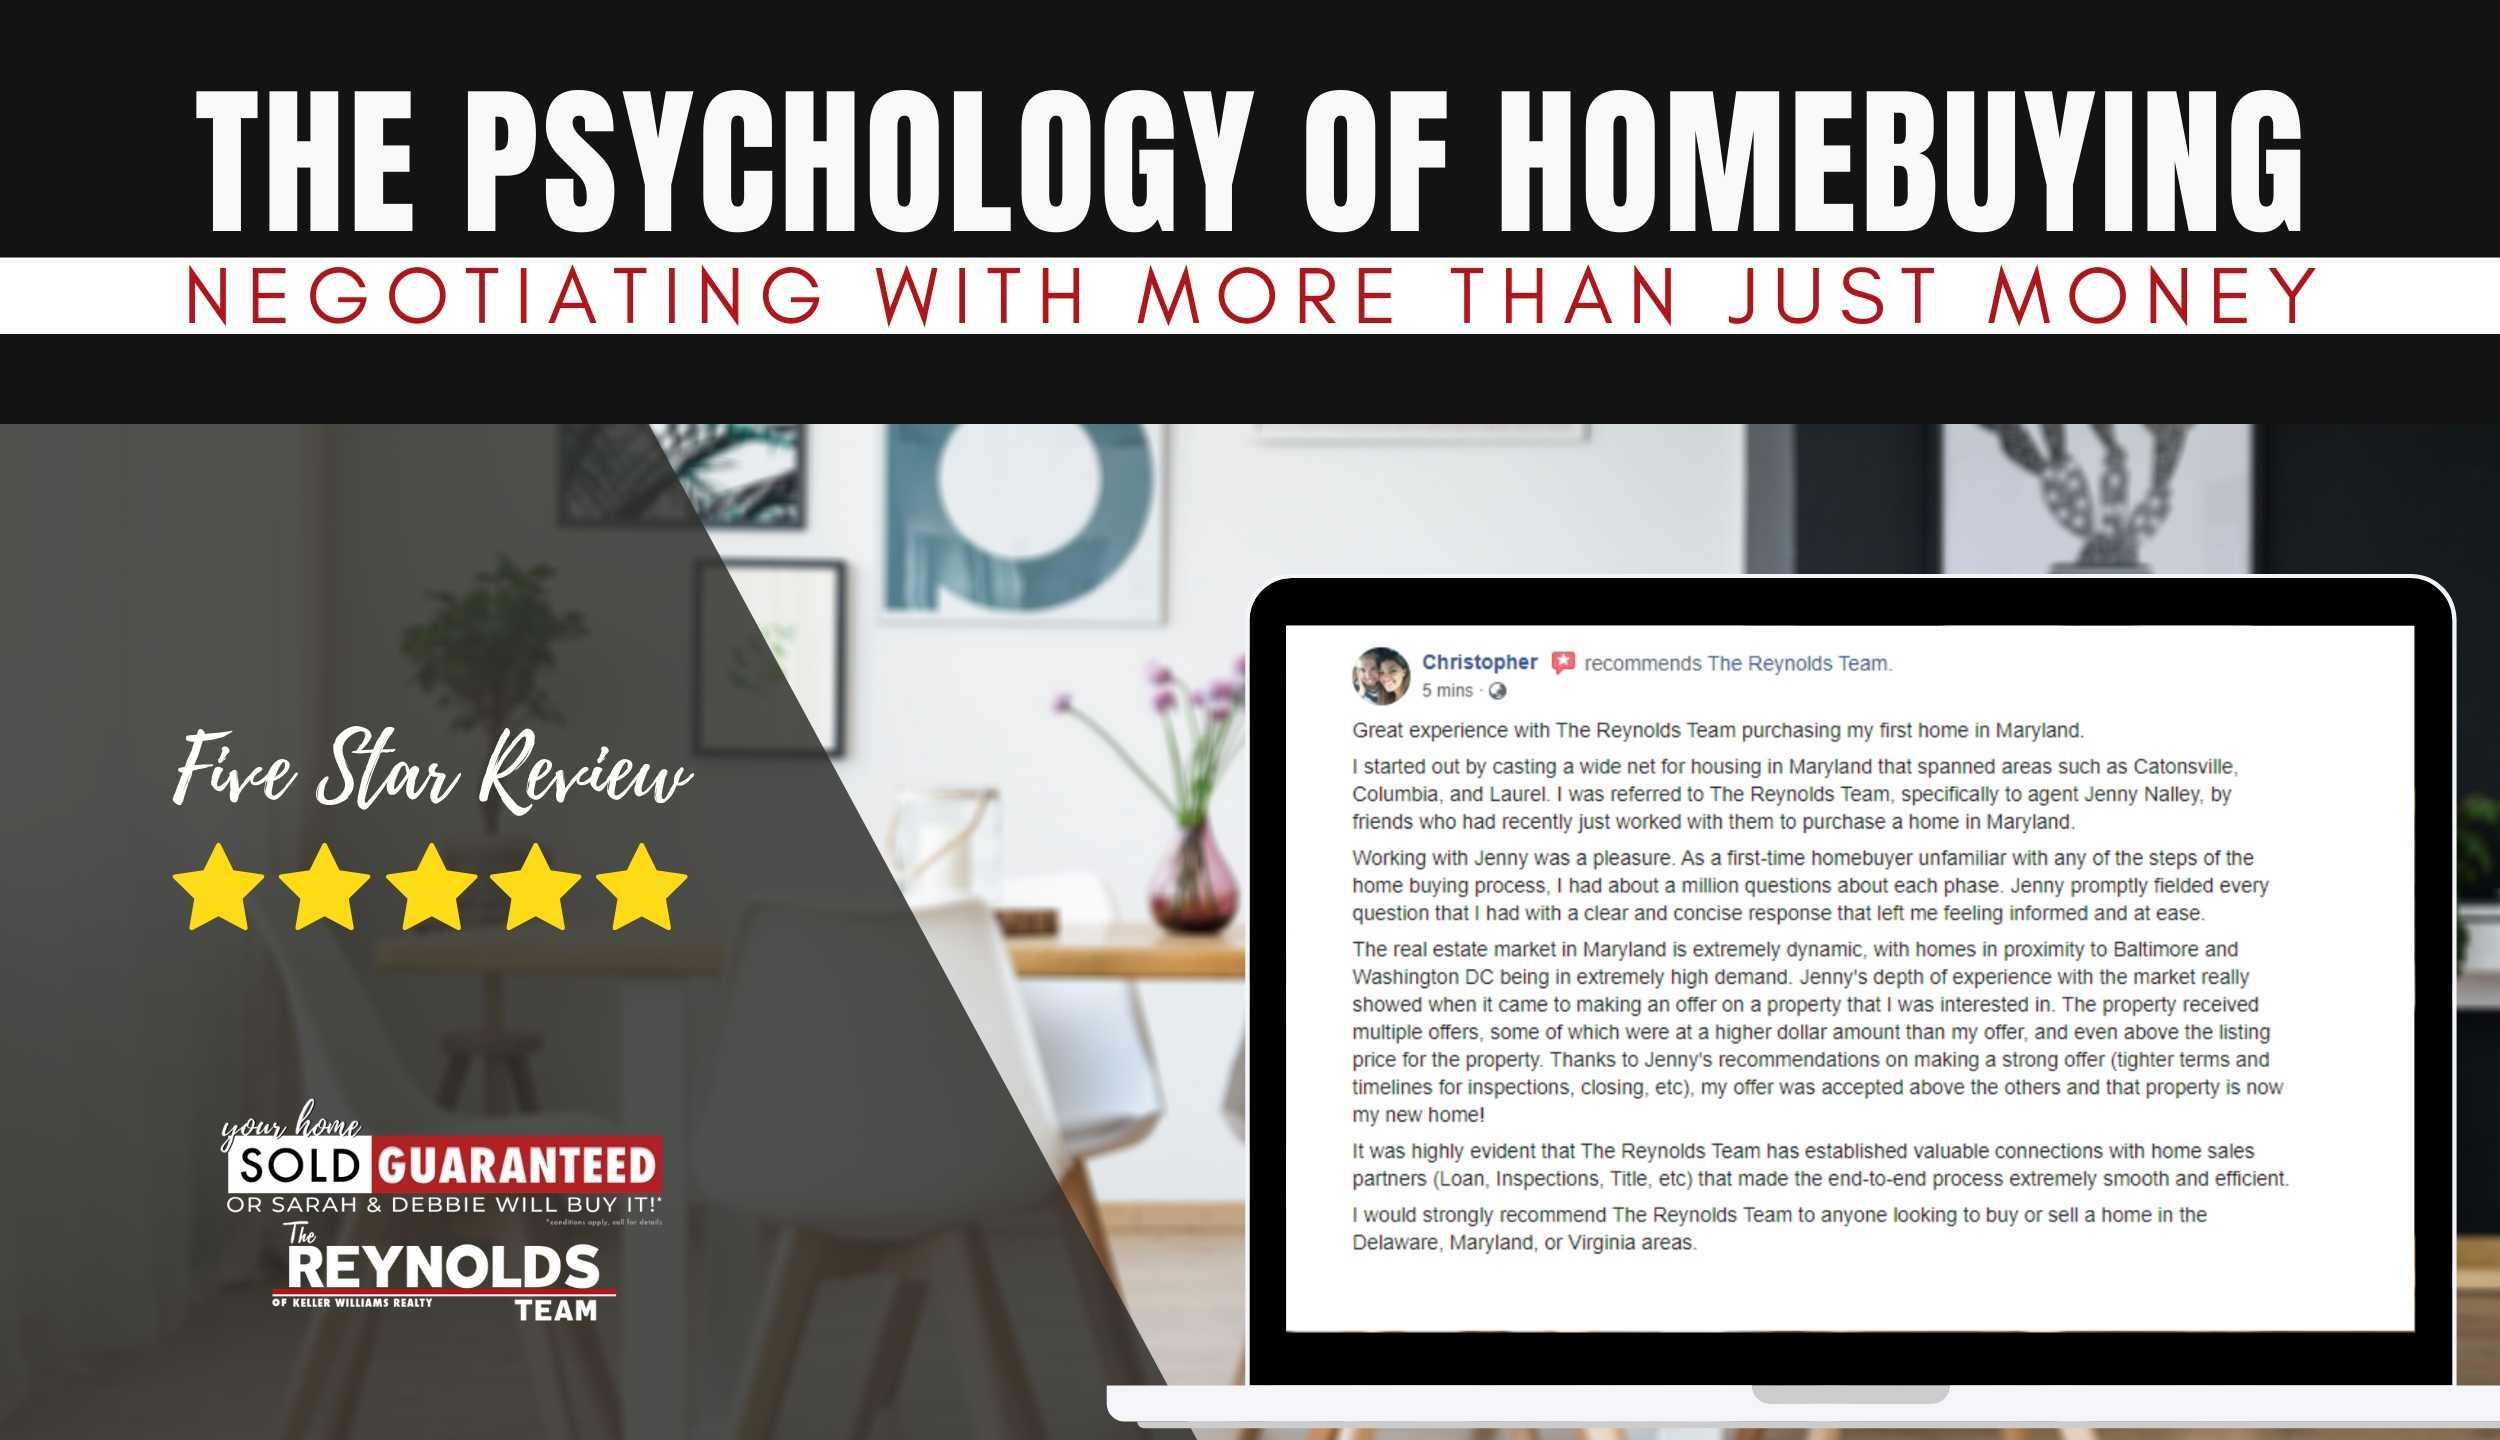 The Psychology of Homebuying: Negotiating With More Than Just Money